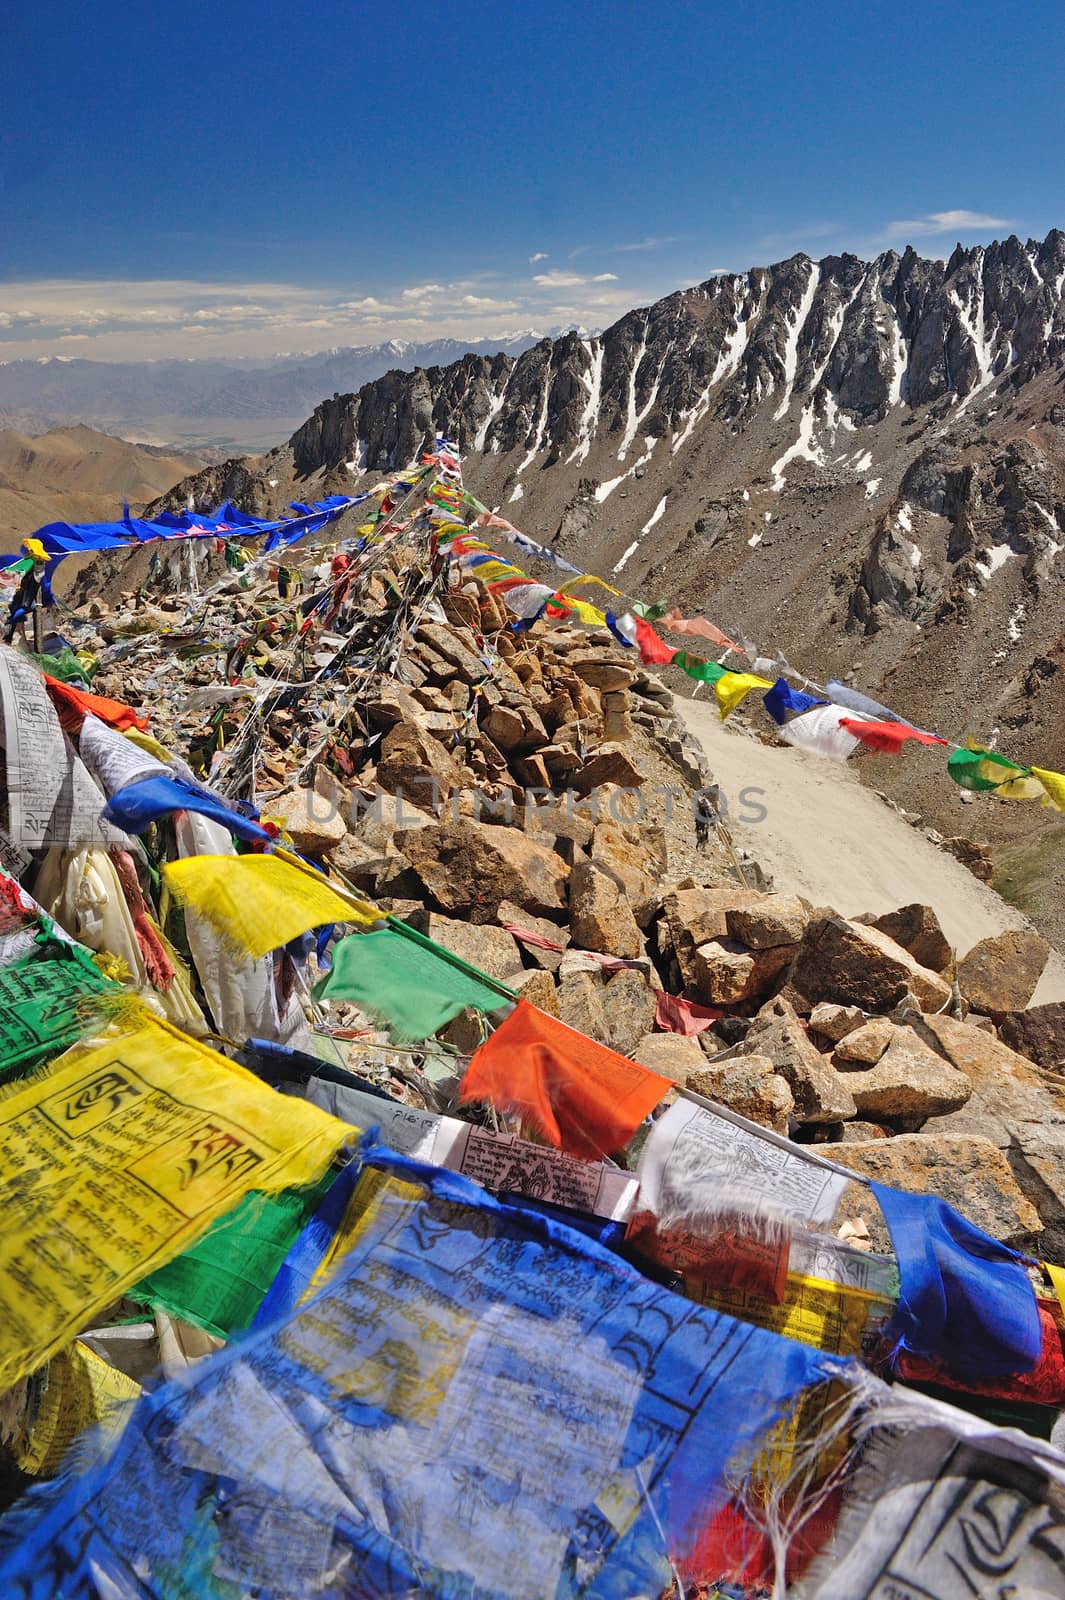 Tibetan flag at Khardungla Pass (The highest road in the world), by think4photop